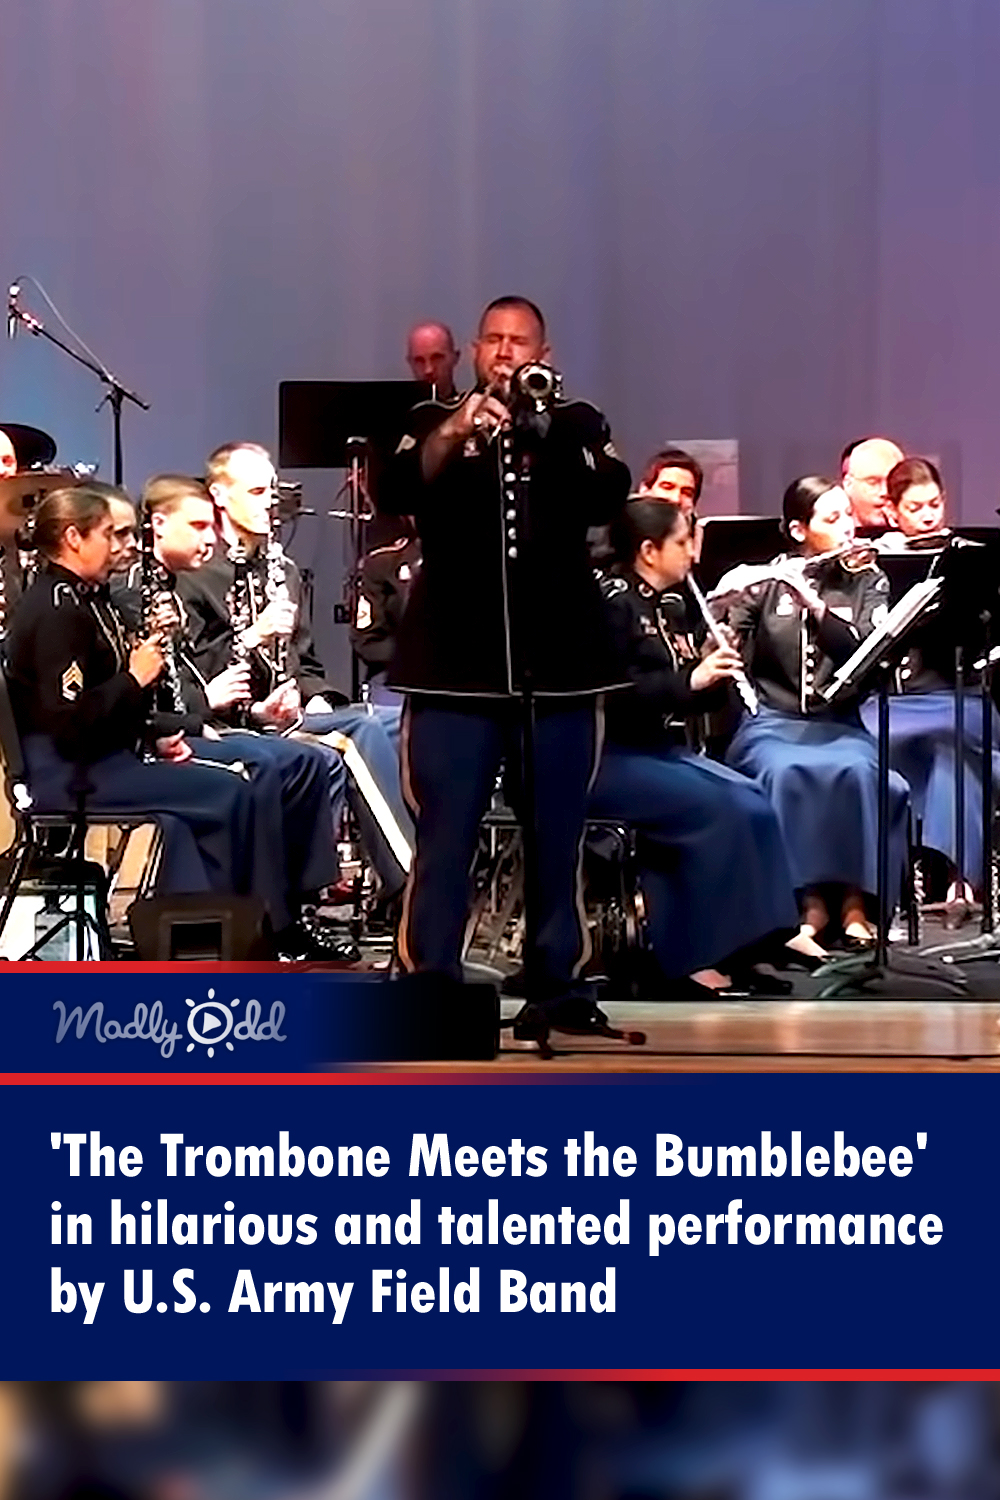 ‘The Trombone Meets the Bumblebee’ by U.S. Army Field Band has some major comedy